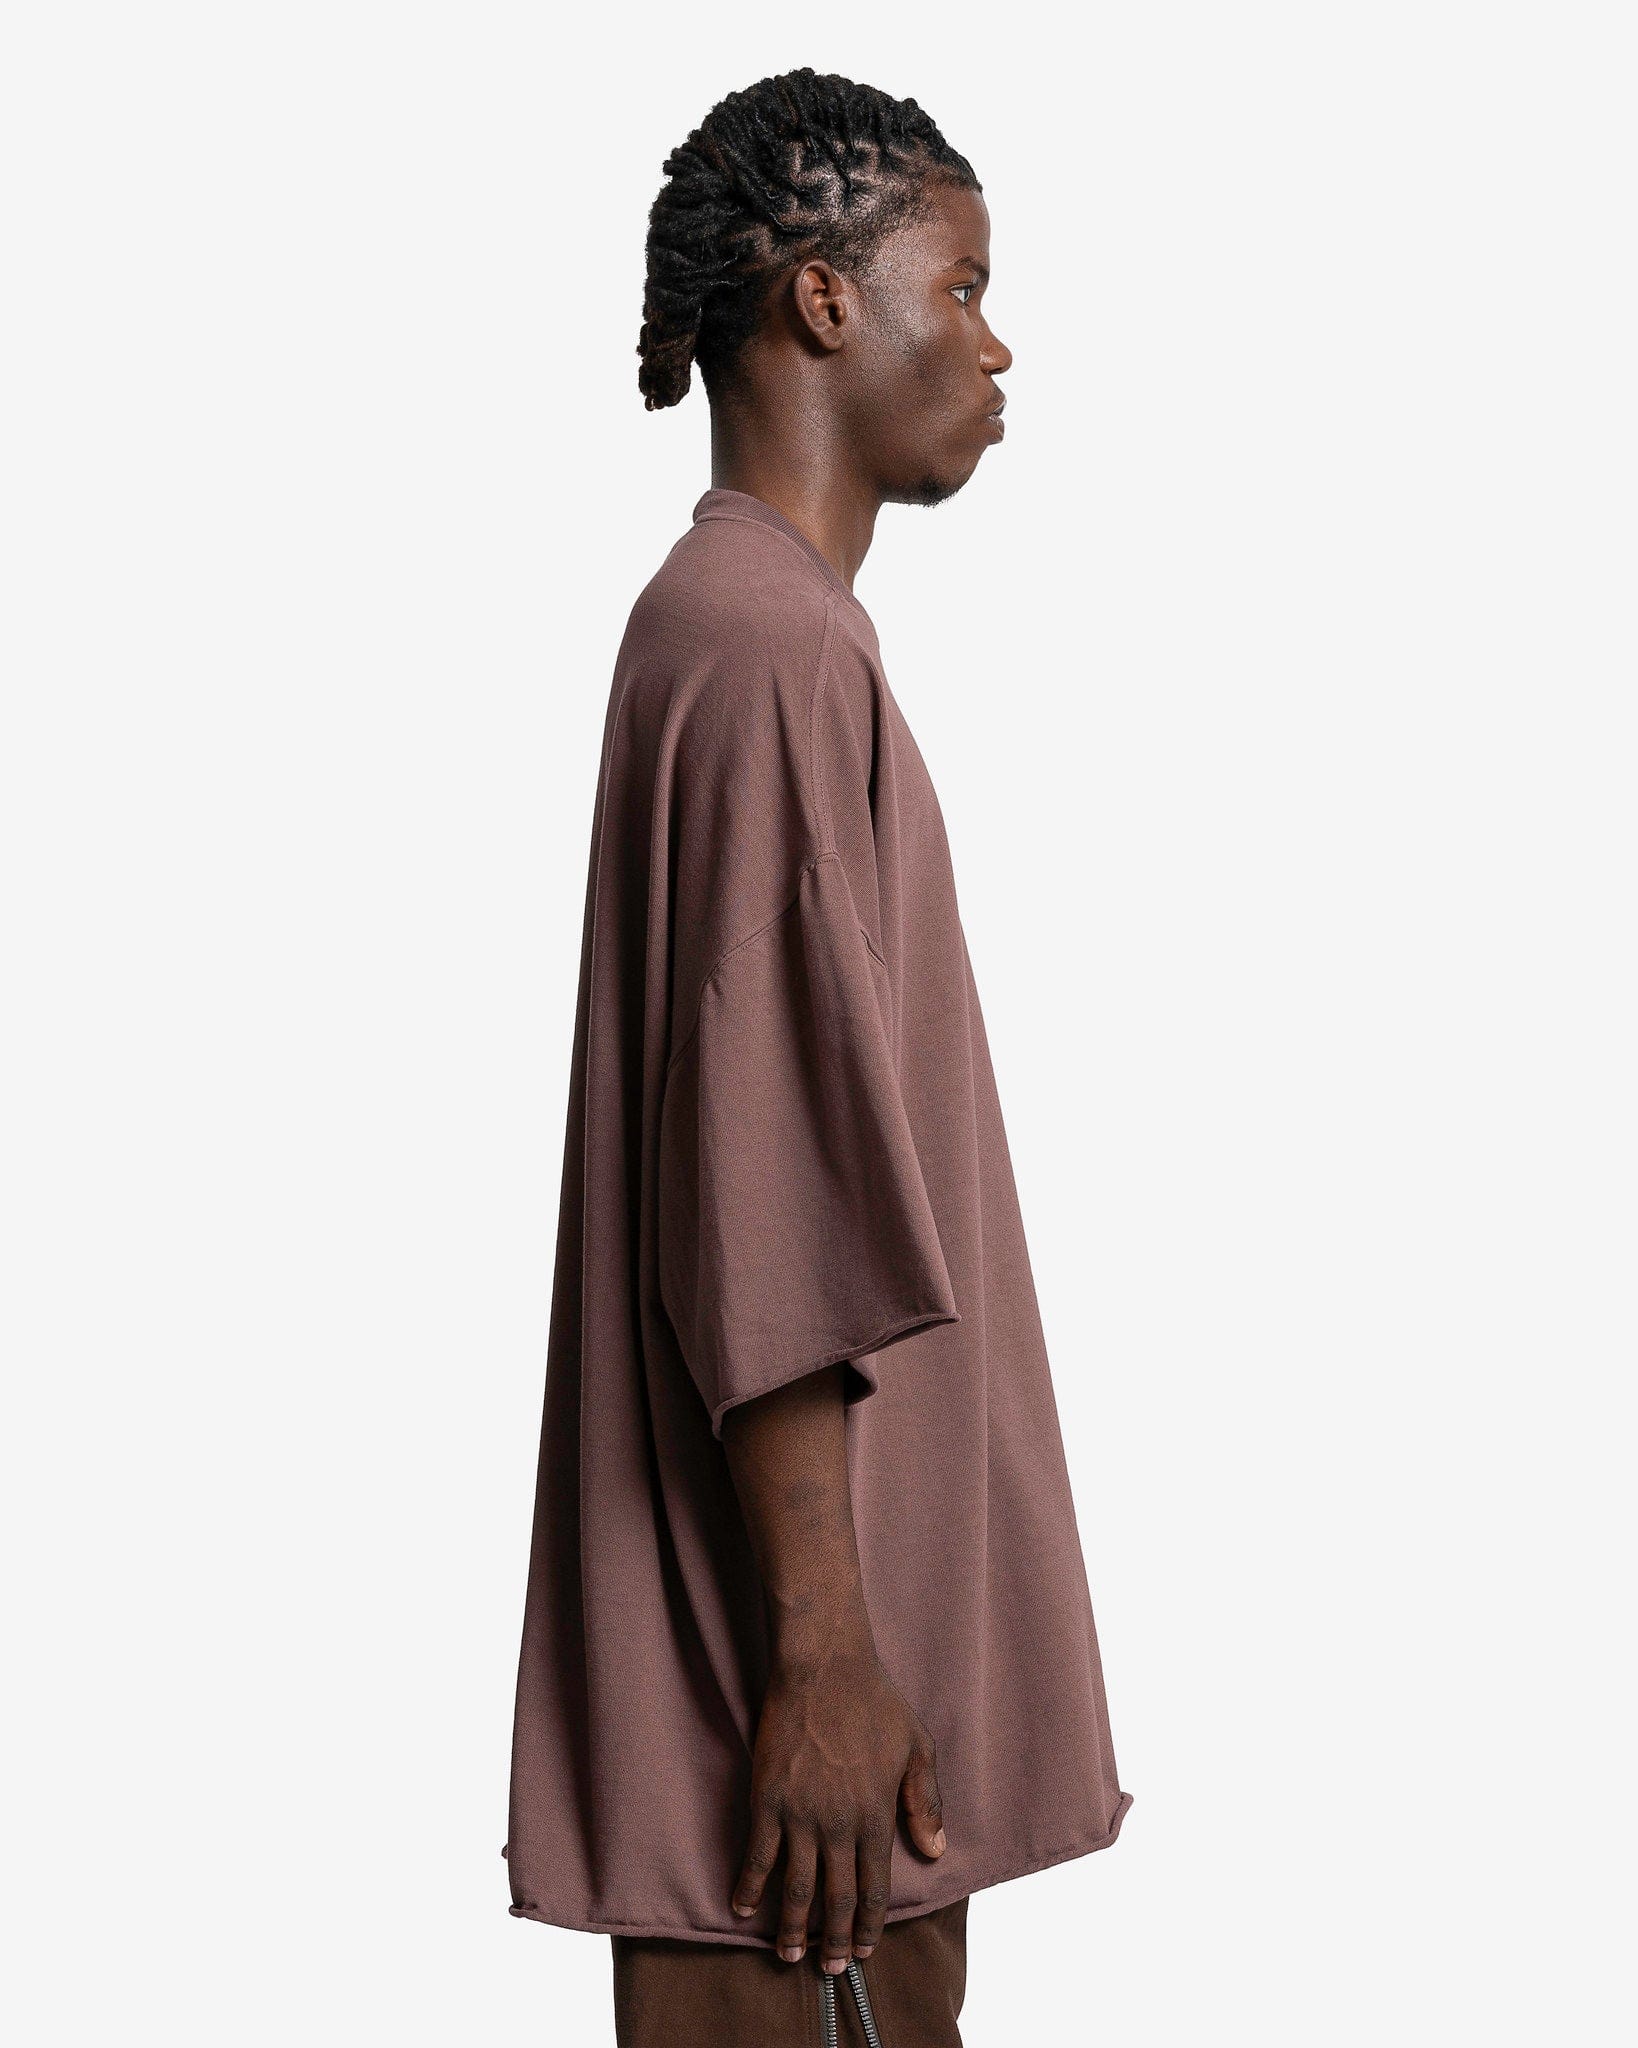 Rick Owens DRKSHDW Men's T-Shirts O/S Tommy T in Mauve